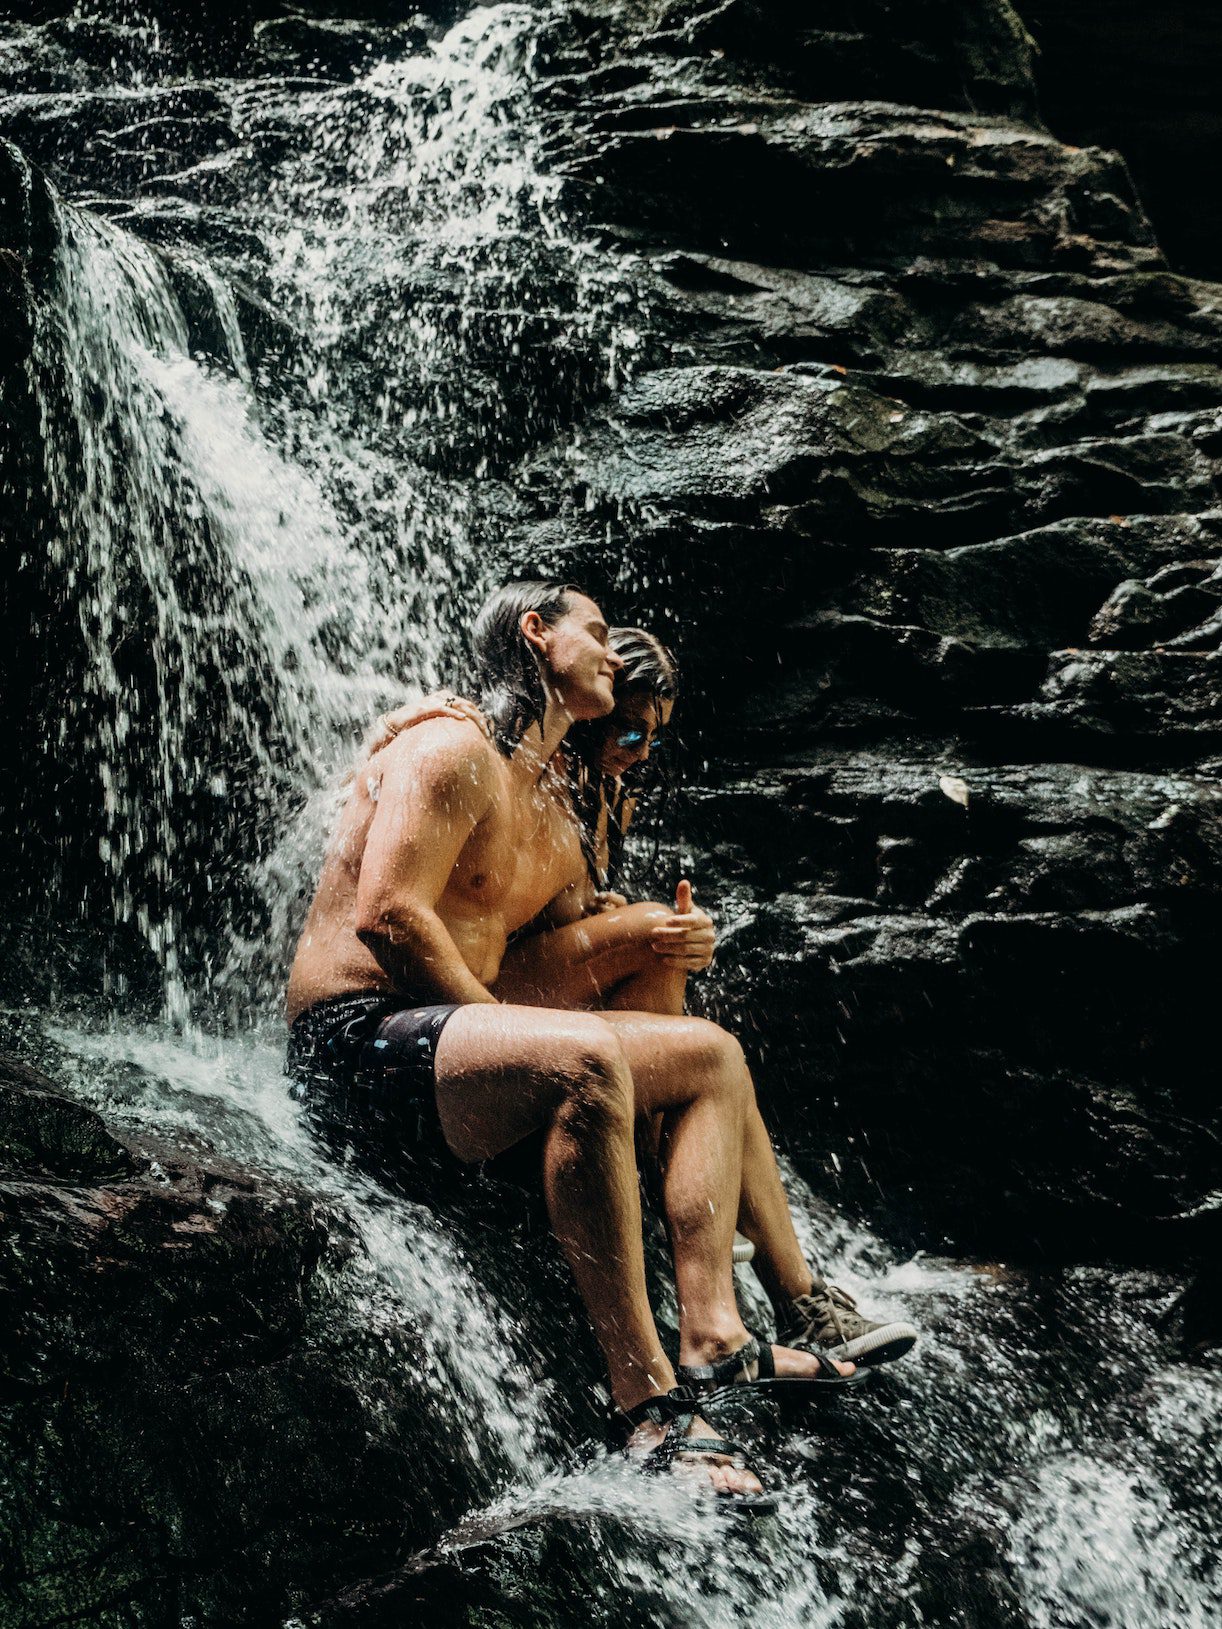 Waterfall Hike | Romantic Honeymoon Ideas | Staycation Ideas for Couples